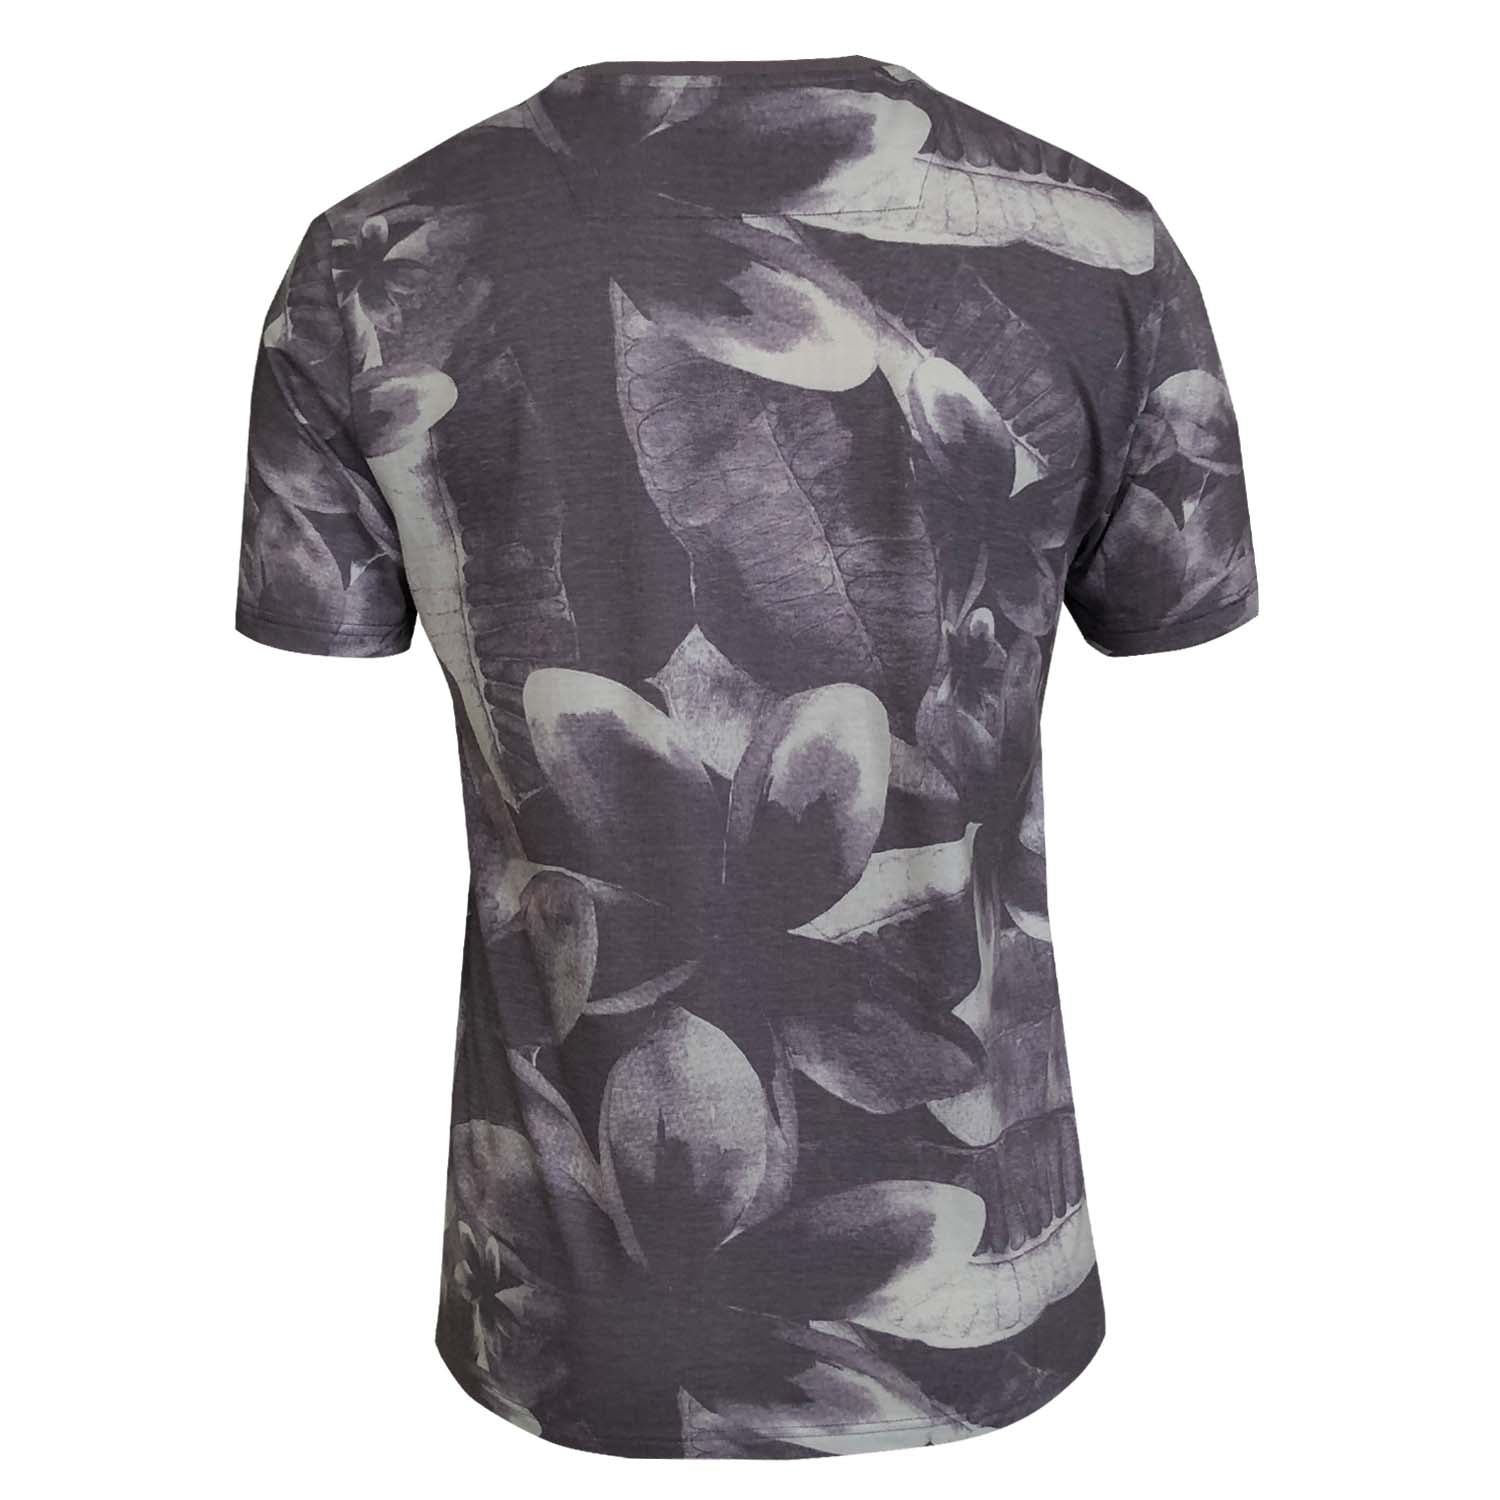 Outrage - All Over Print HIBISCUS WASH T-Shirt - LabelledUp.com